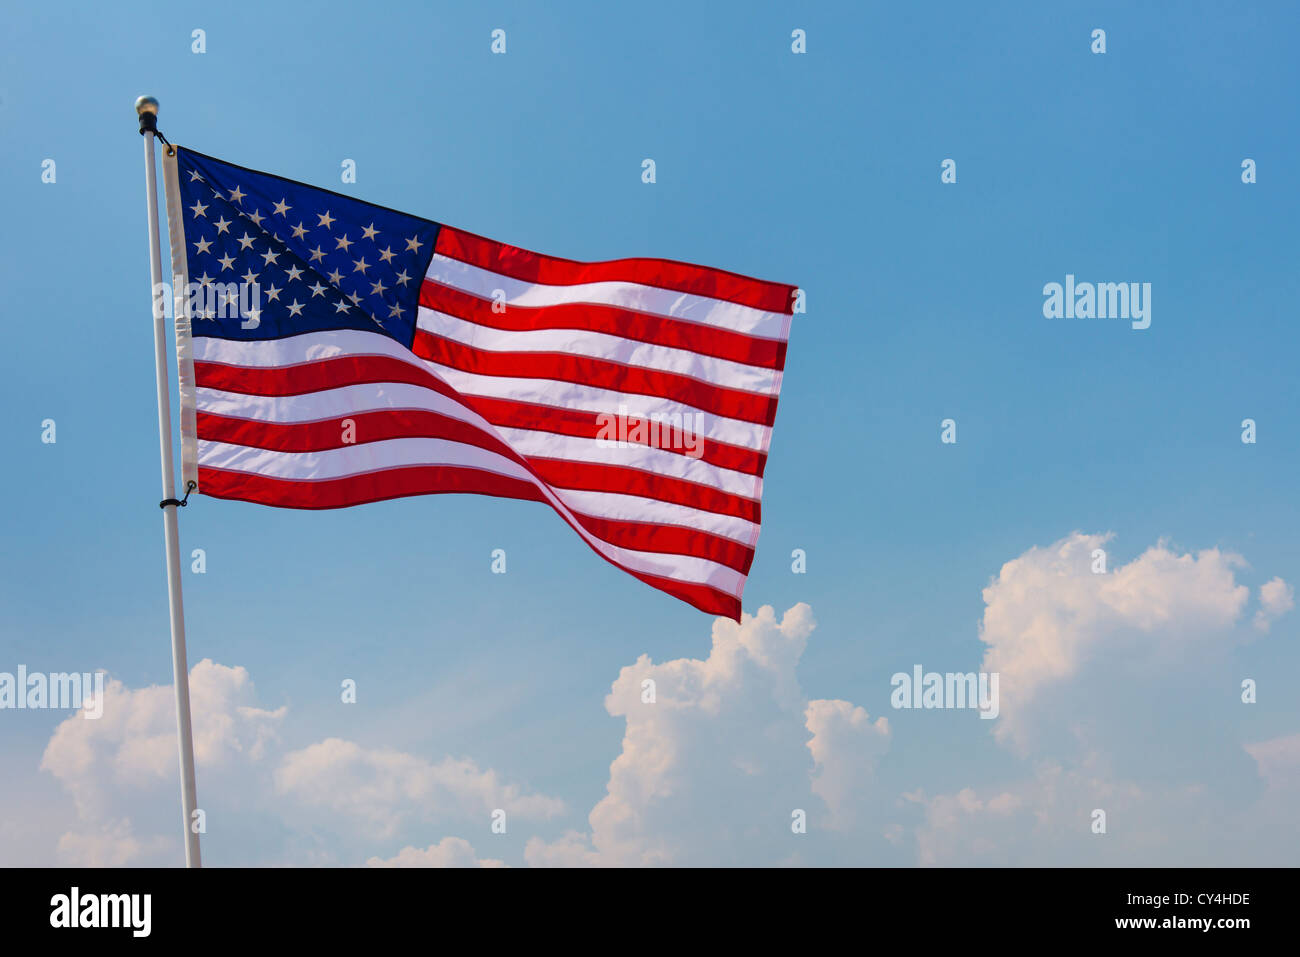 USA, New Jersey, Jersey City, US flag against blue sky Stock Photo